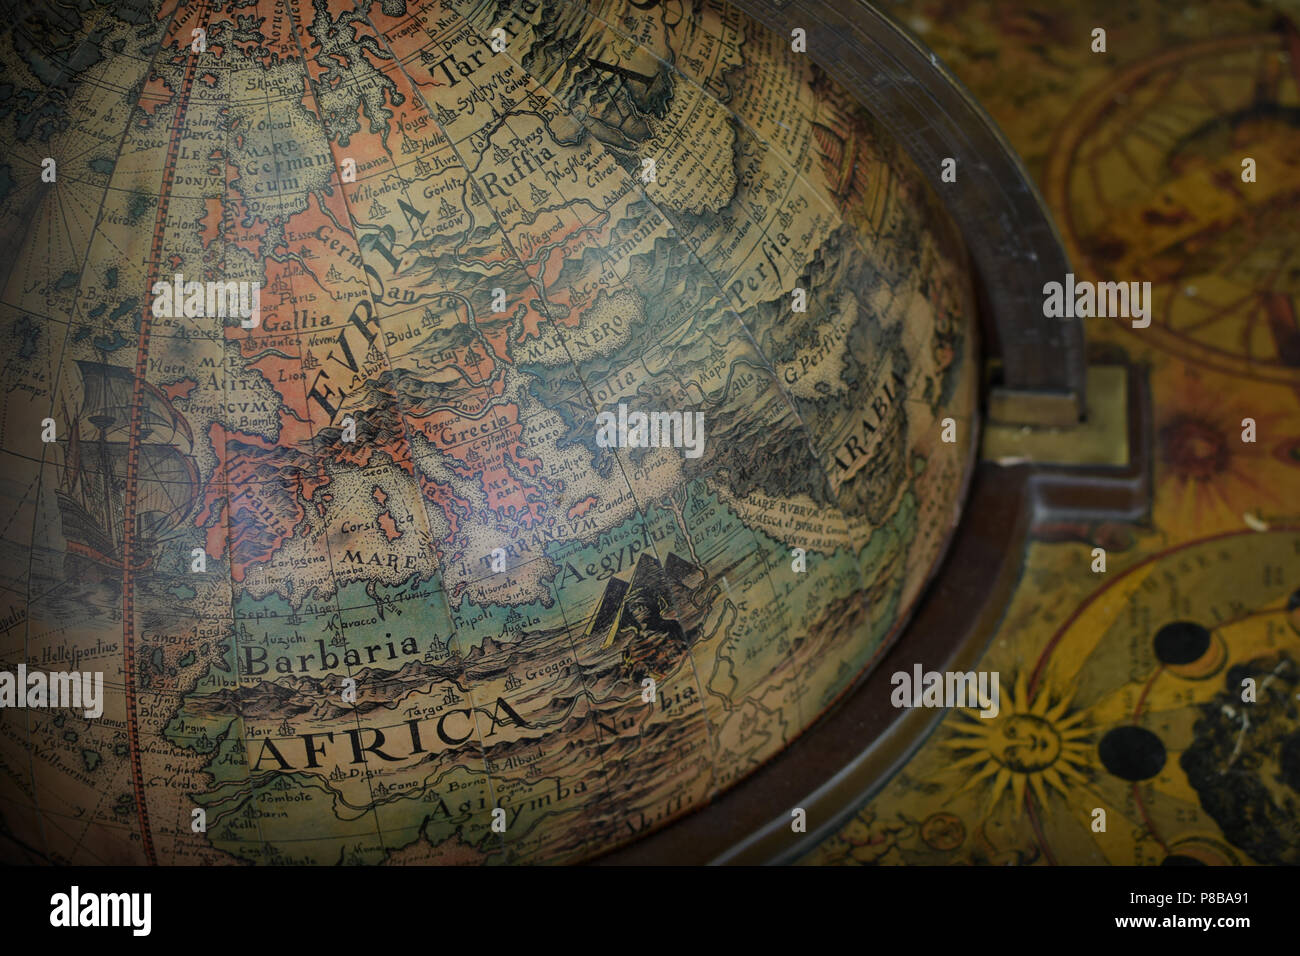 Detail of antique old world terrestrial globe with map of Europe and Africa. Stock Photo